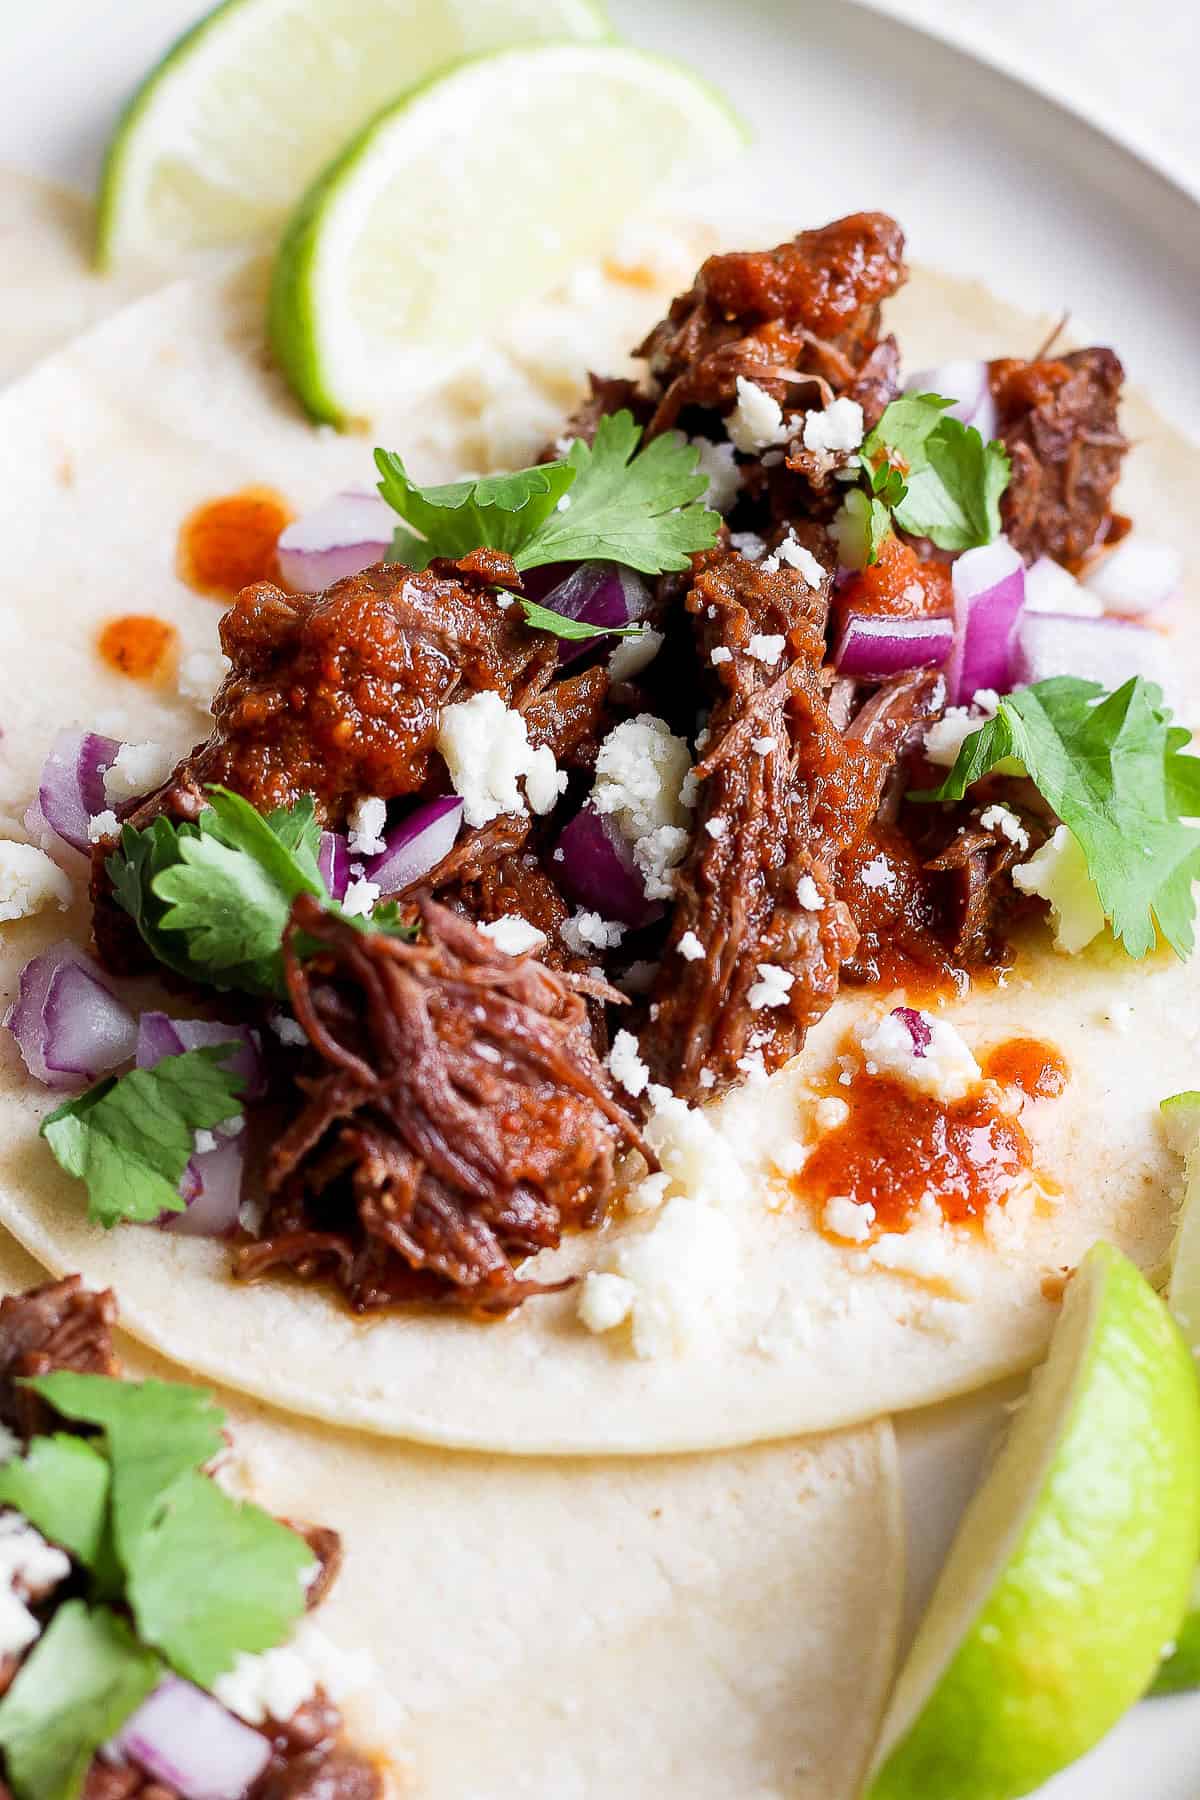 Beef tinga served in a taco ready to eat